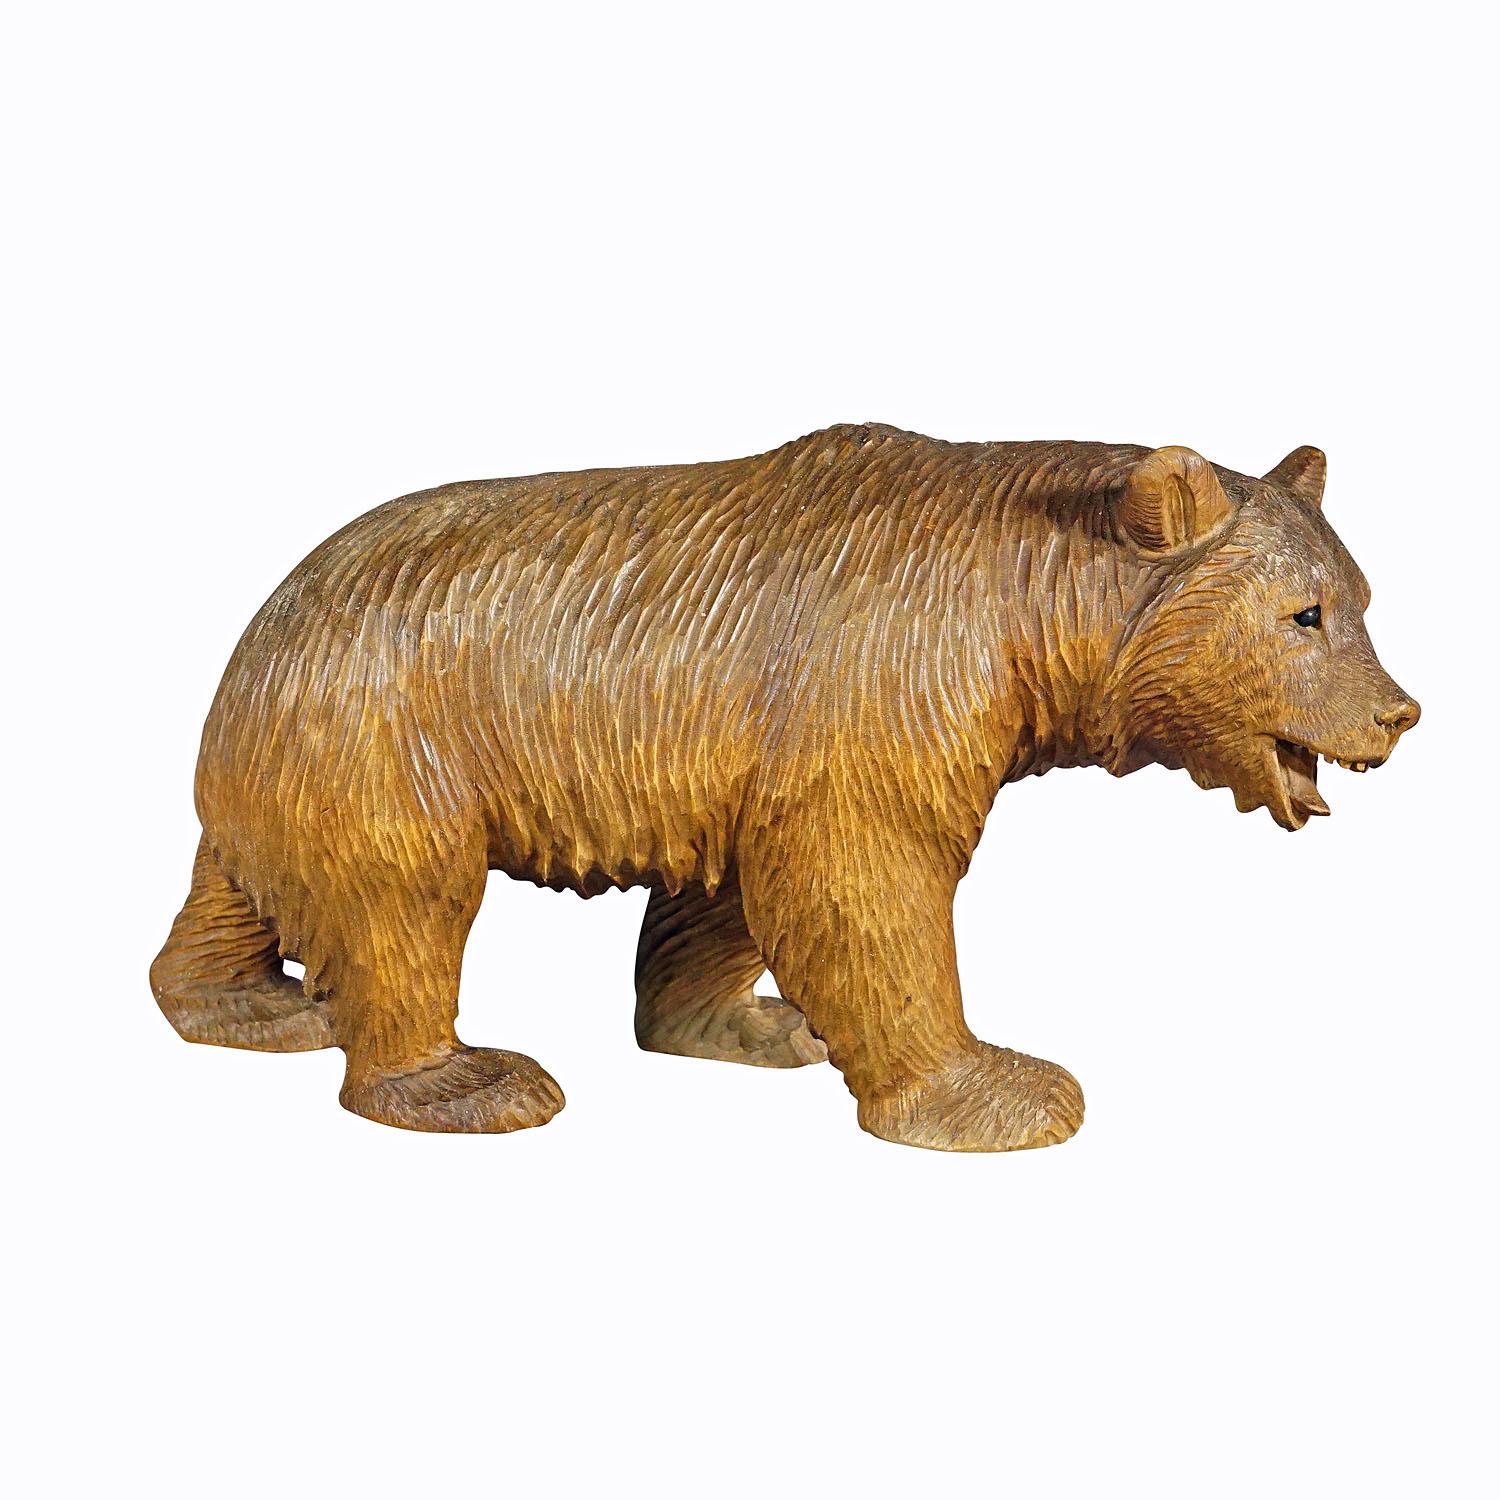 Vintage wooden strolling bear hand carved in Brienz, circa 1930s

A vintage statue of a walking bear. Made of lindenwood, finely hand carved with naturalistic details in Brienz, Switzerland ca. 1930s. A nice example of the famous Black Forest